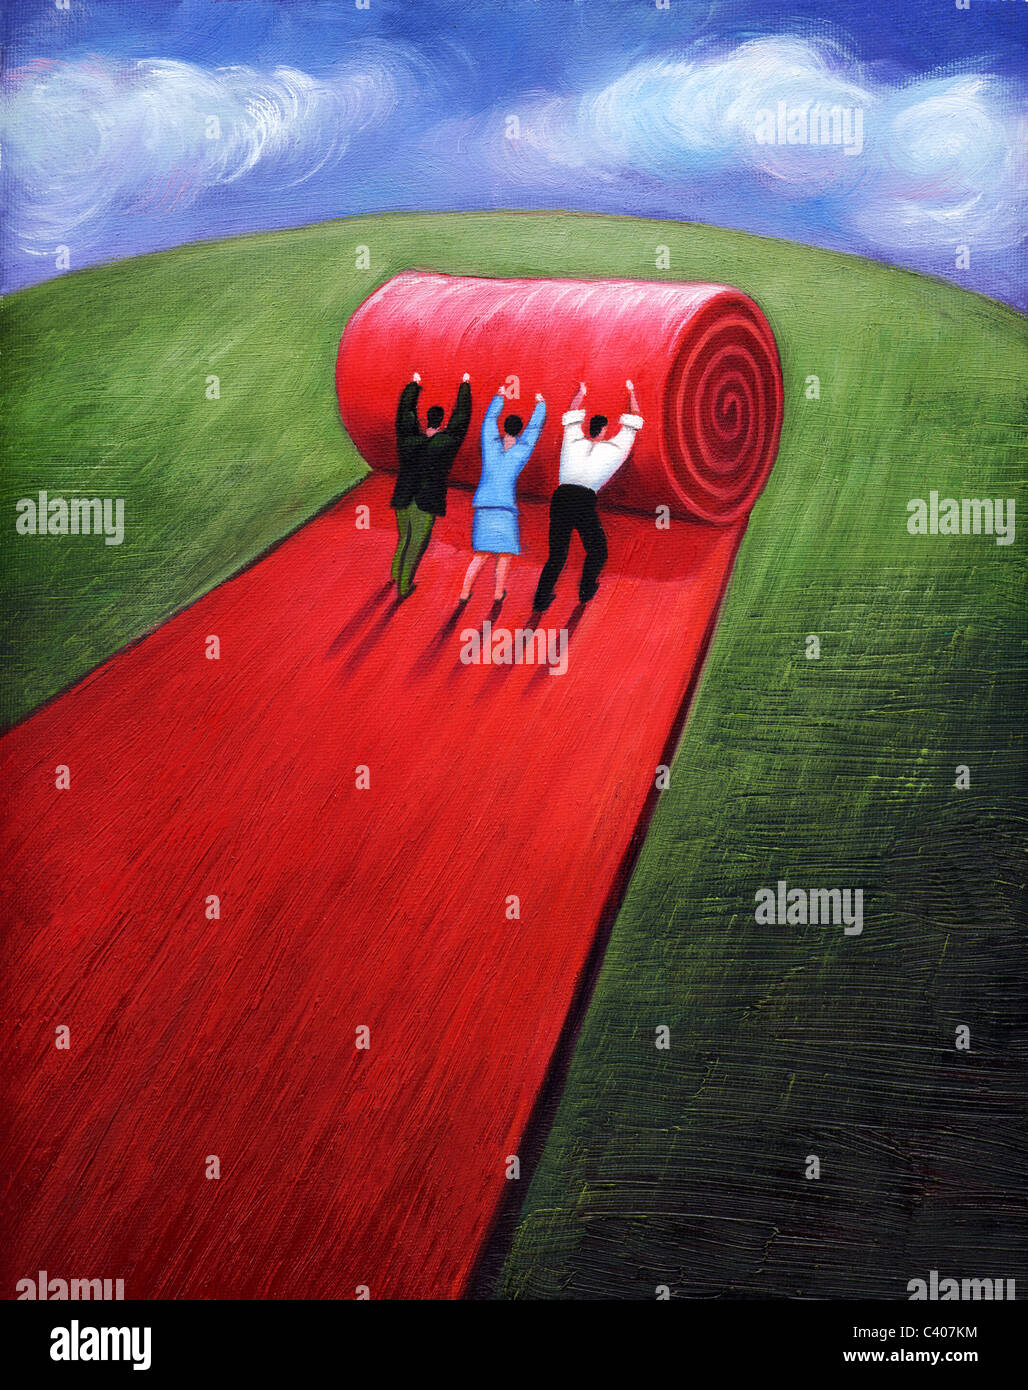 Illustration of people rolling out a red carpet Stock Photo